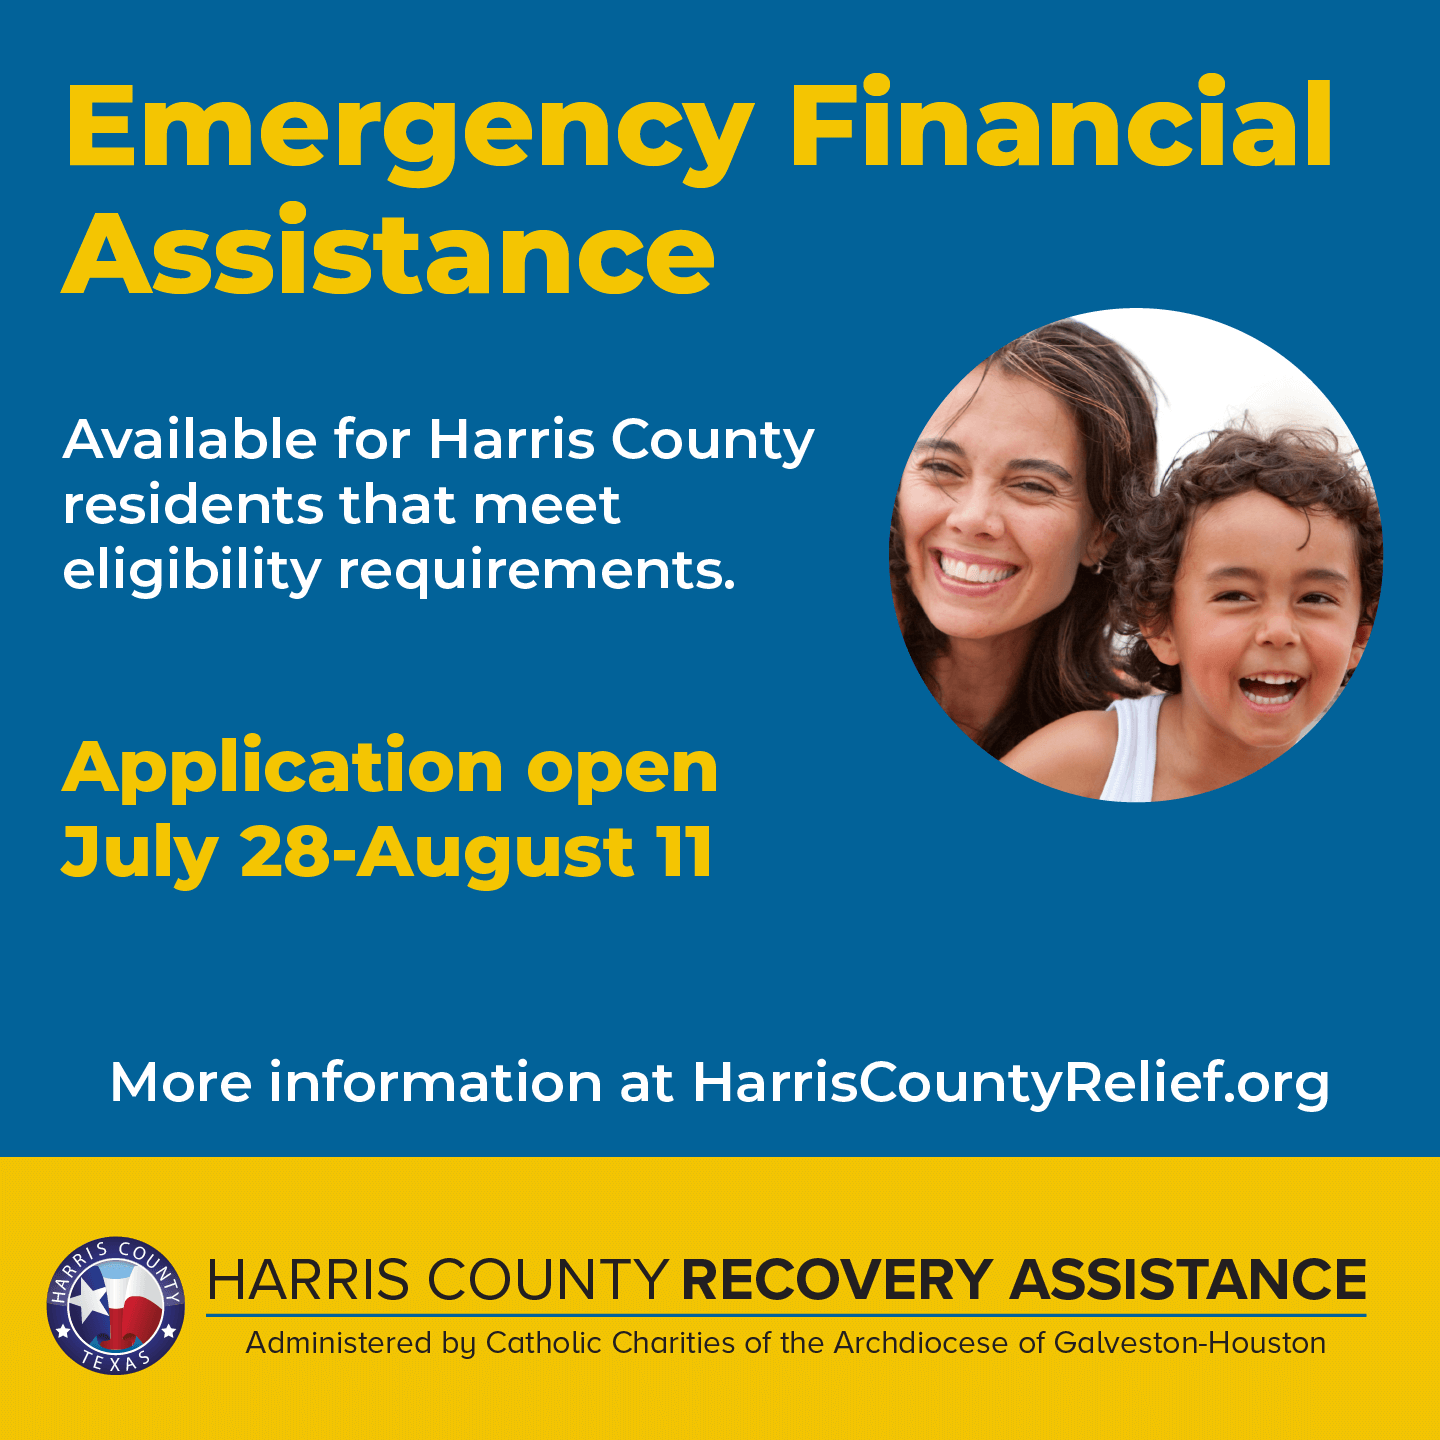 Harris County Recovery Assistance program opens July 28-August 11.